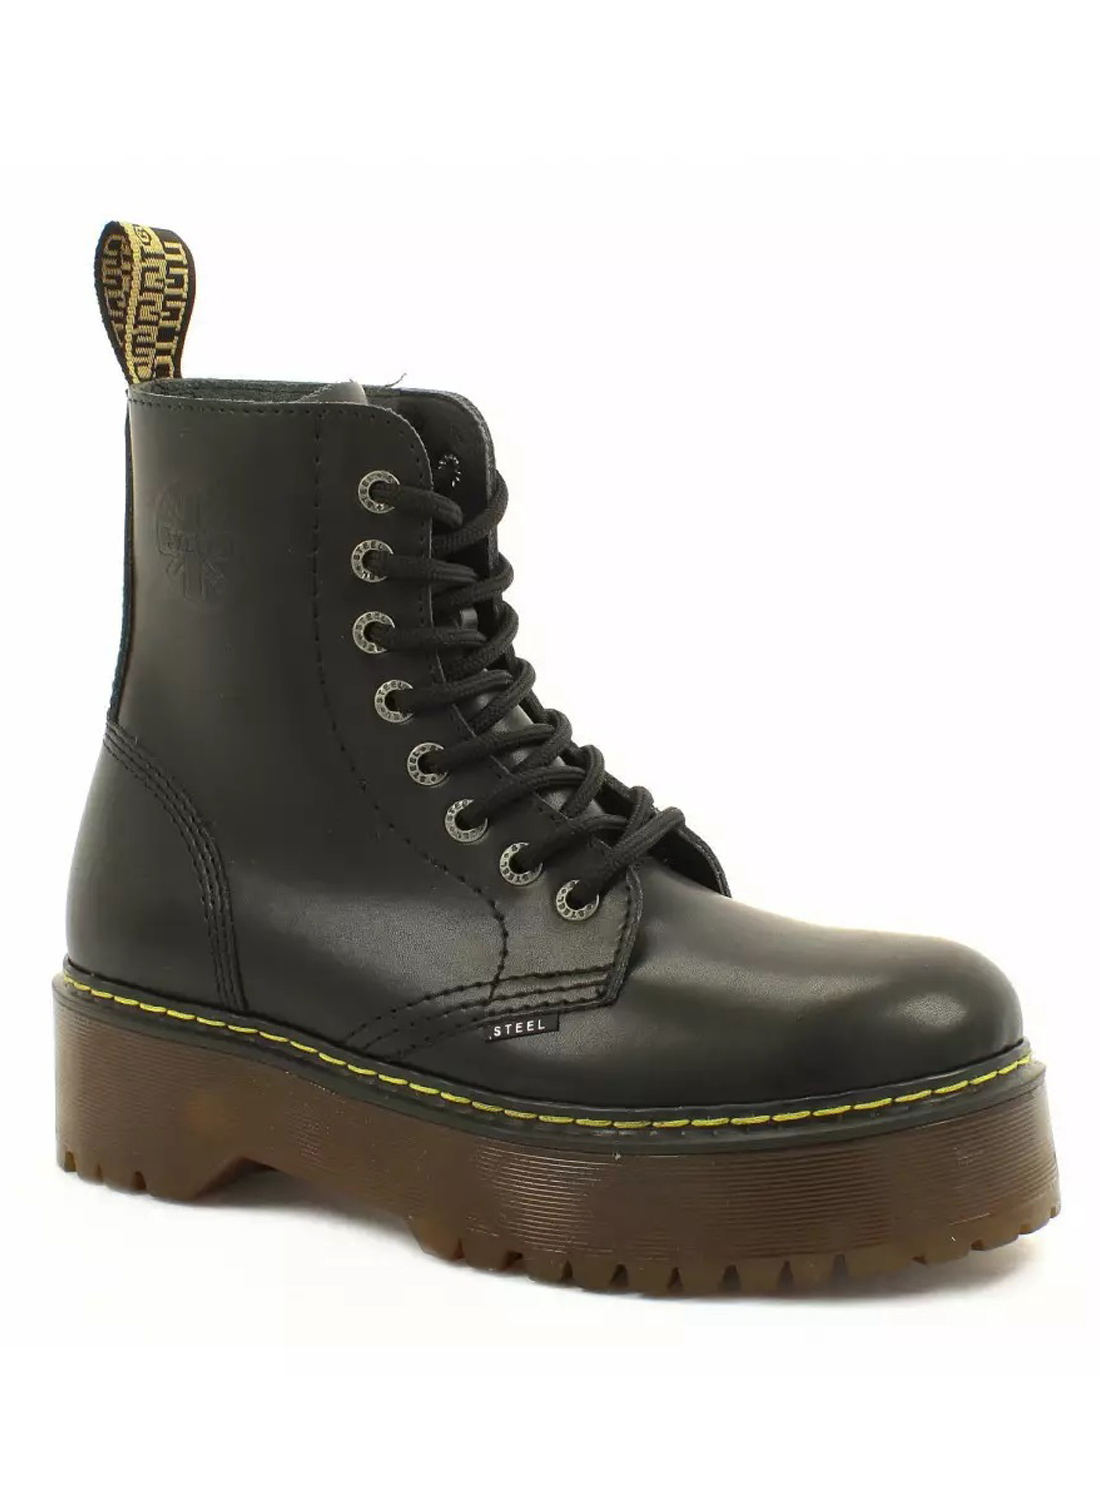 Steel 8 Holes Chancky Air Sole boots